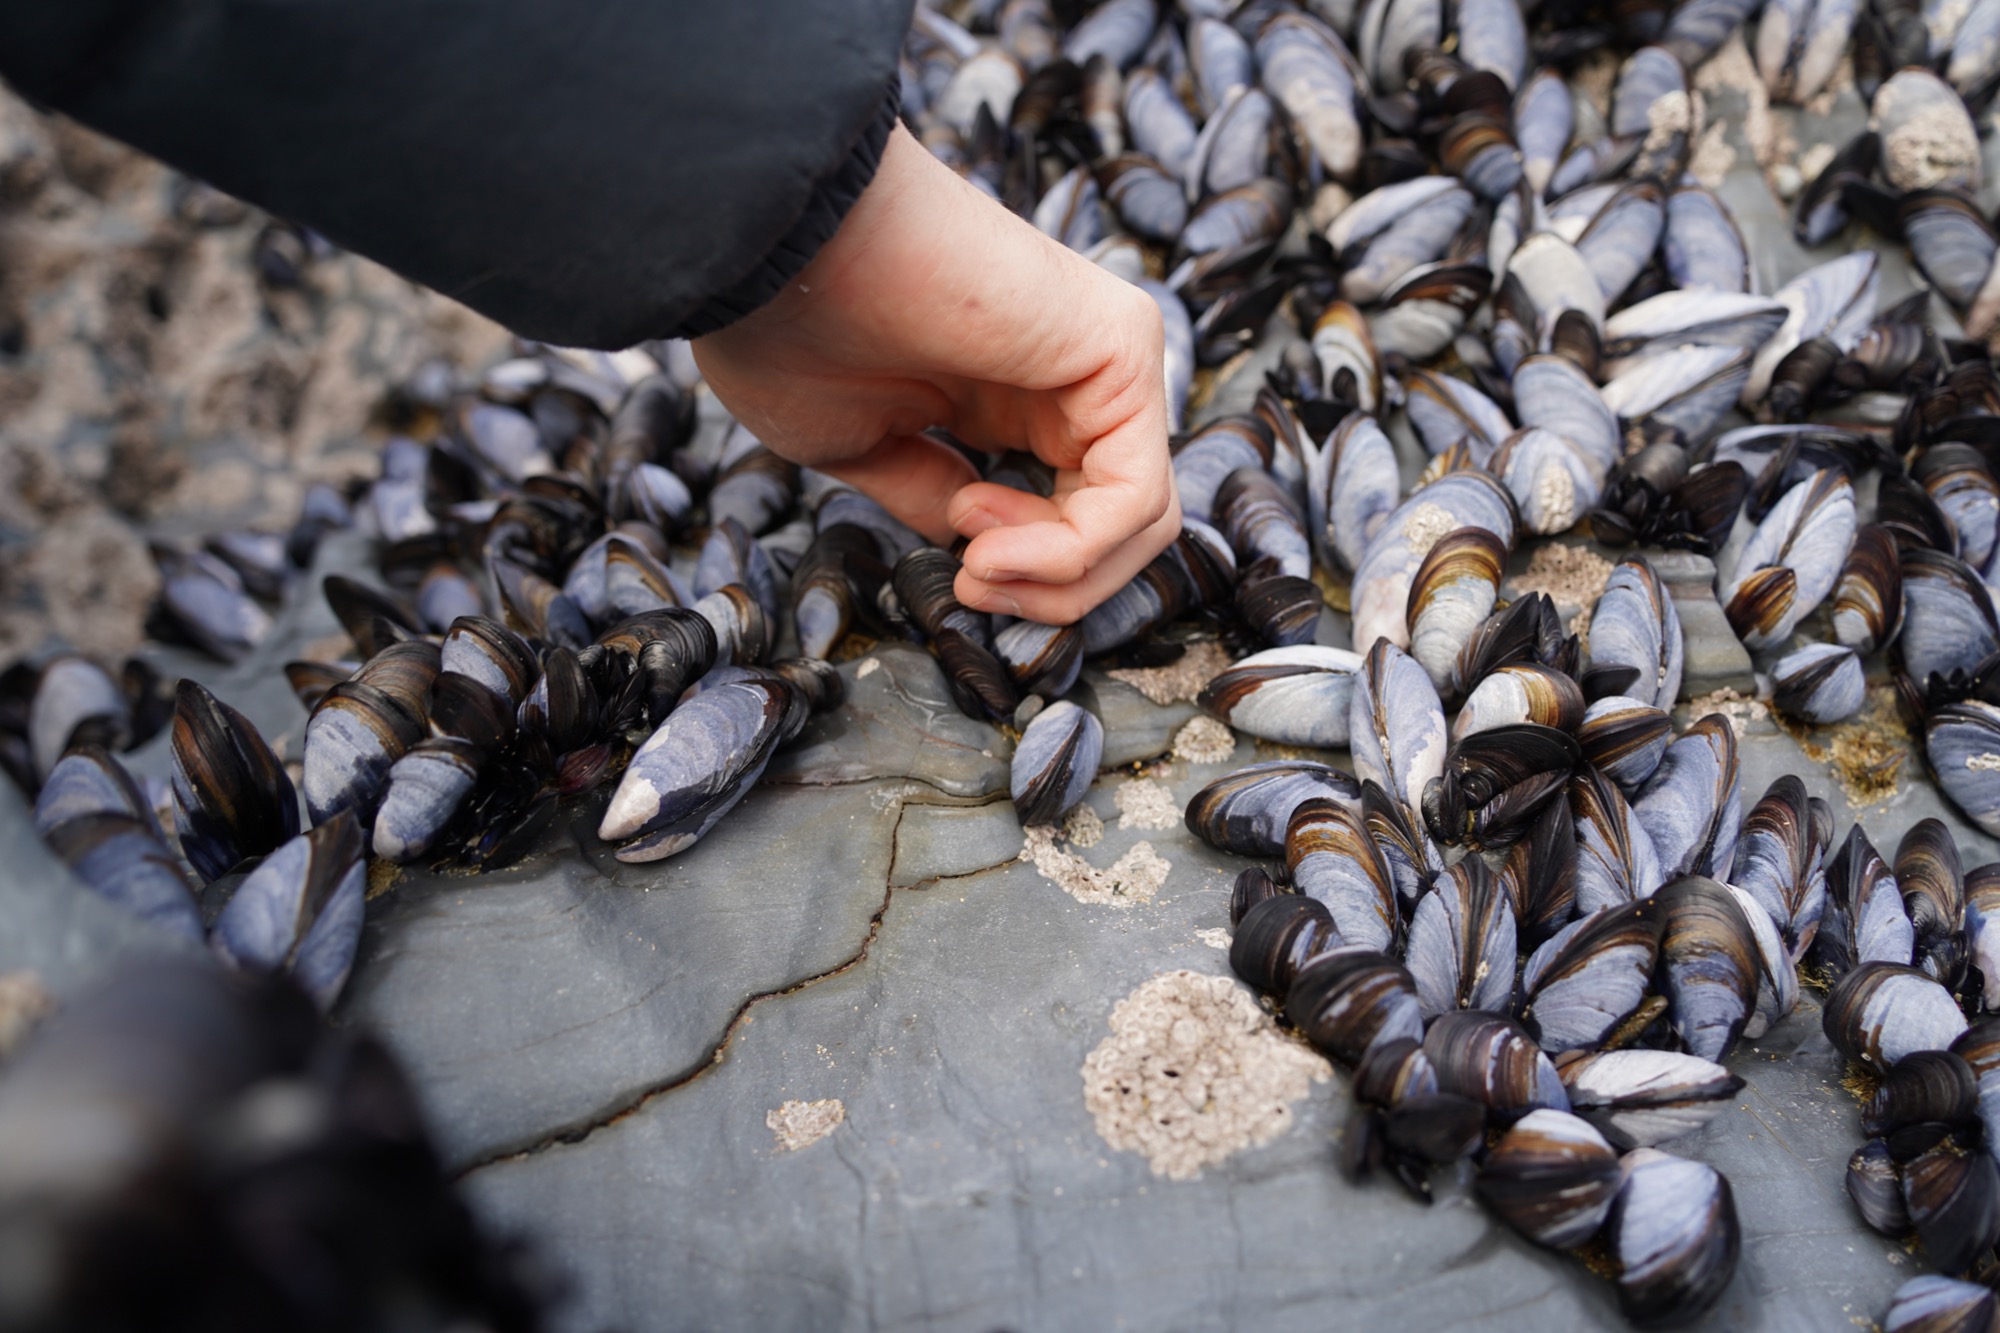 mussels for bait